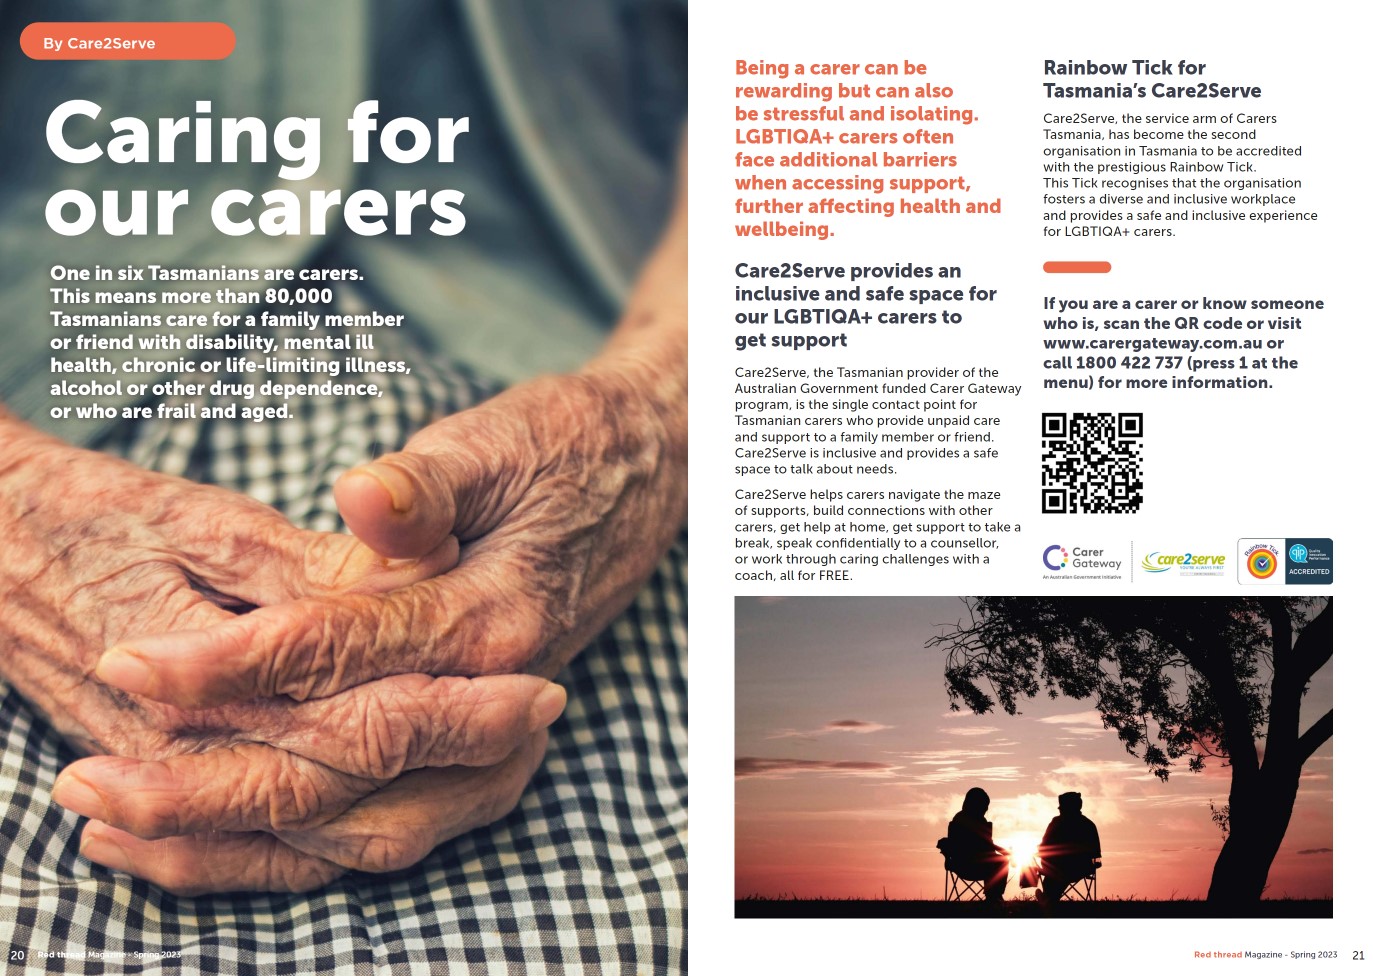 Caring For our Carers Image